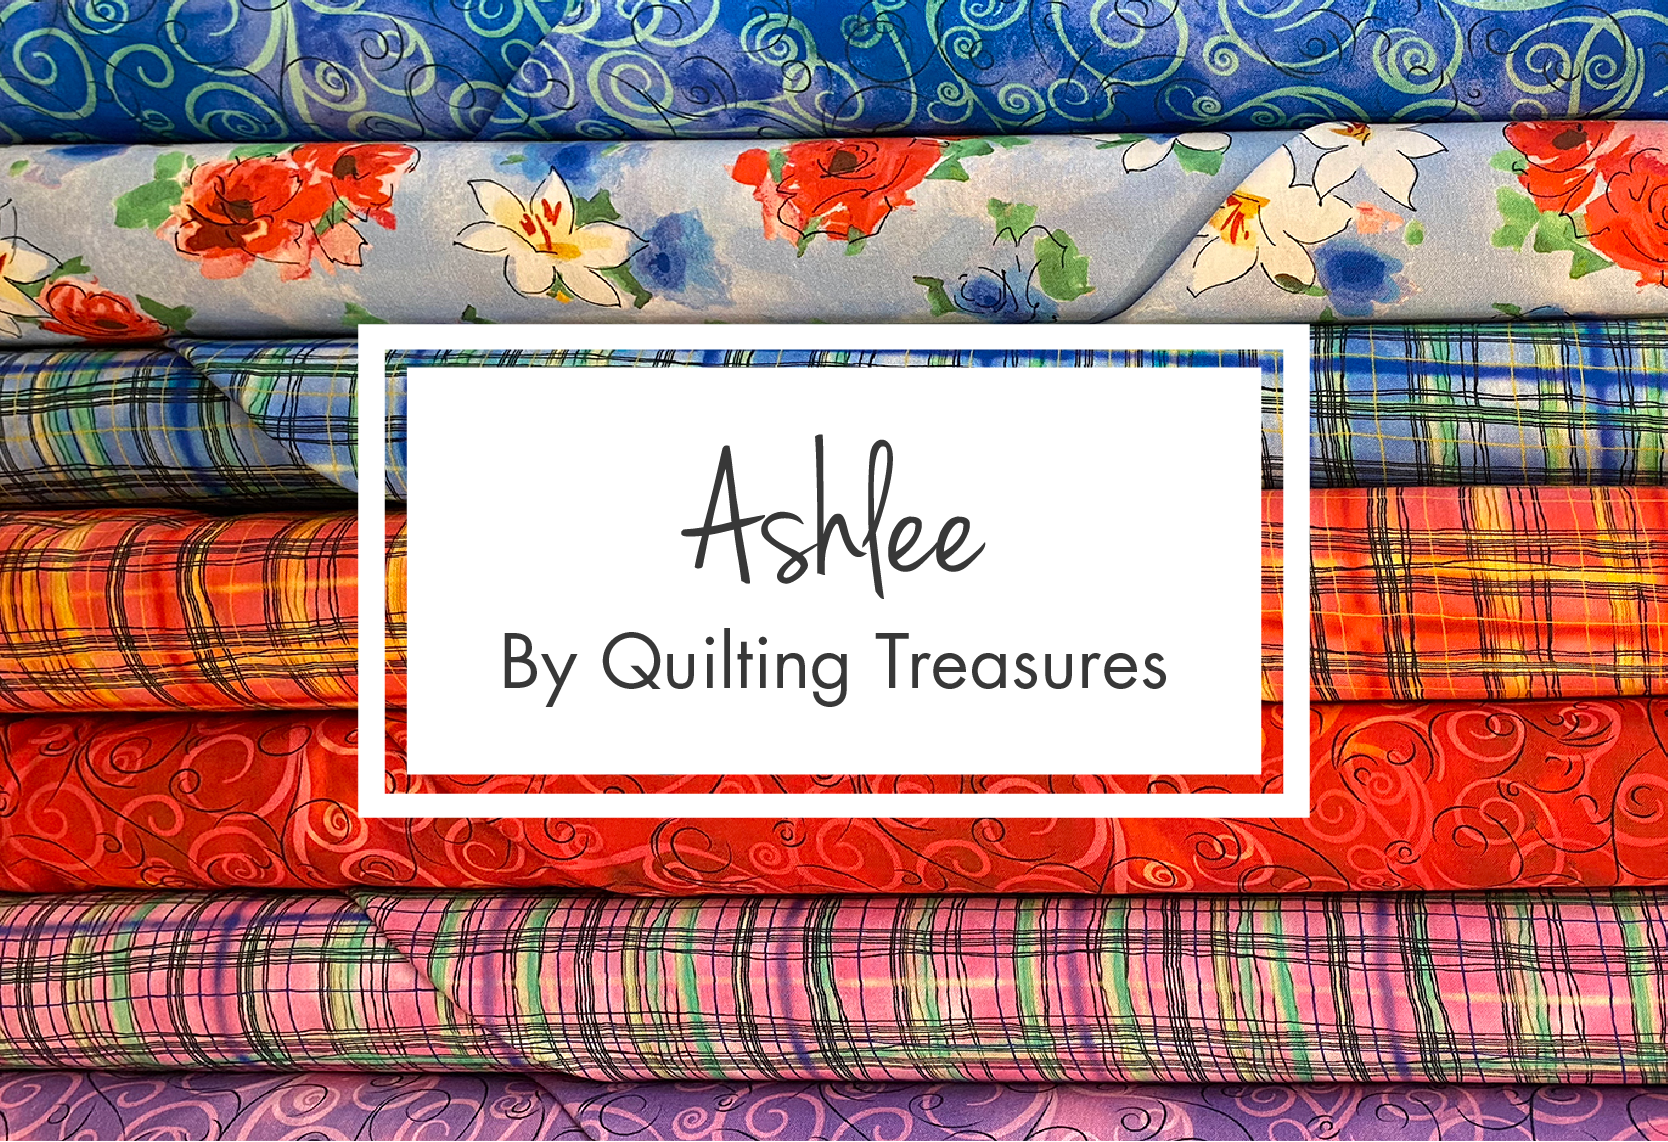 Ashlee by Quilting Treasures